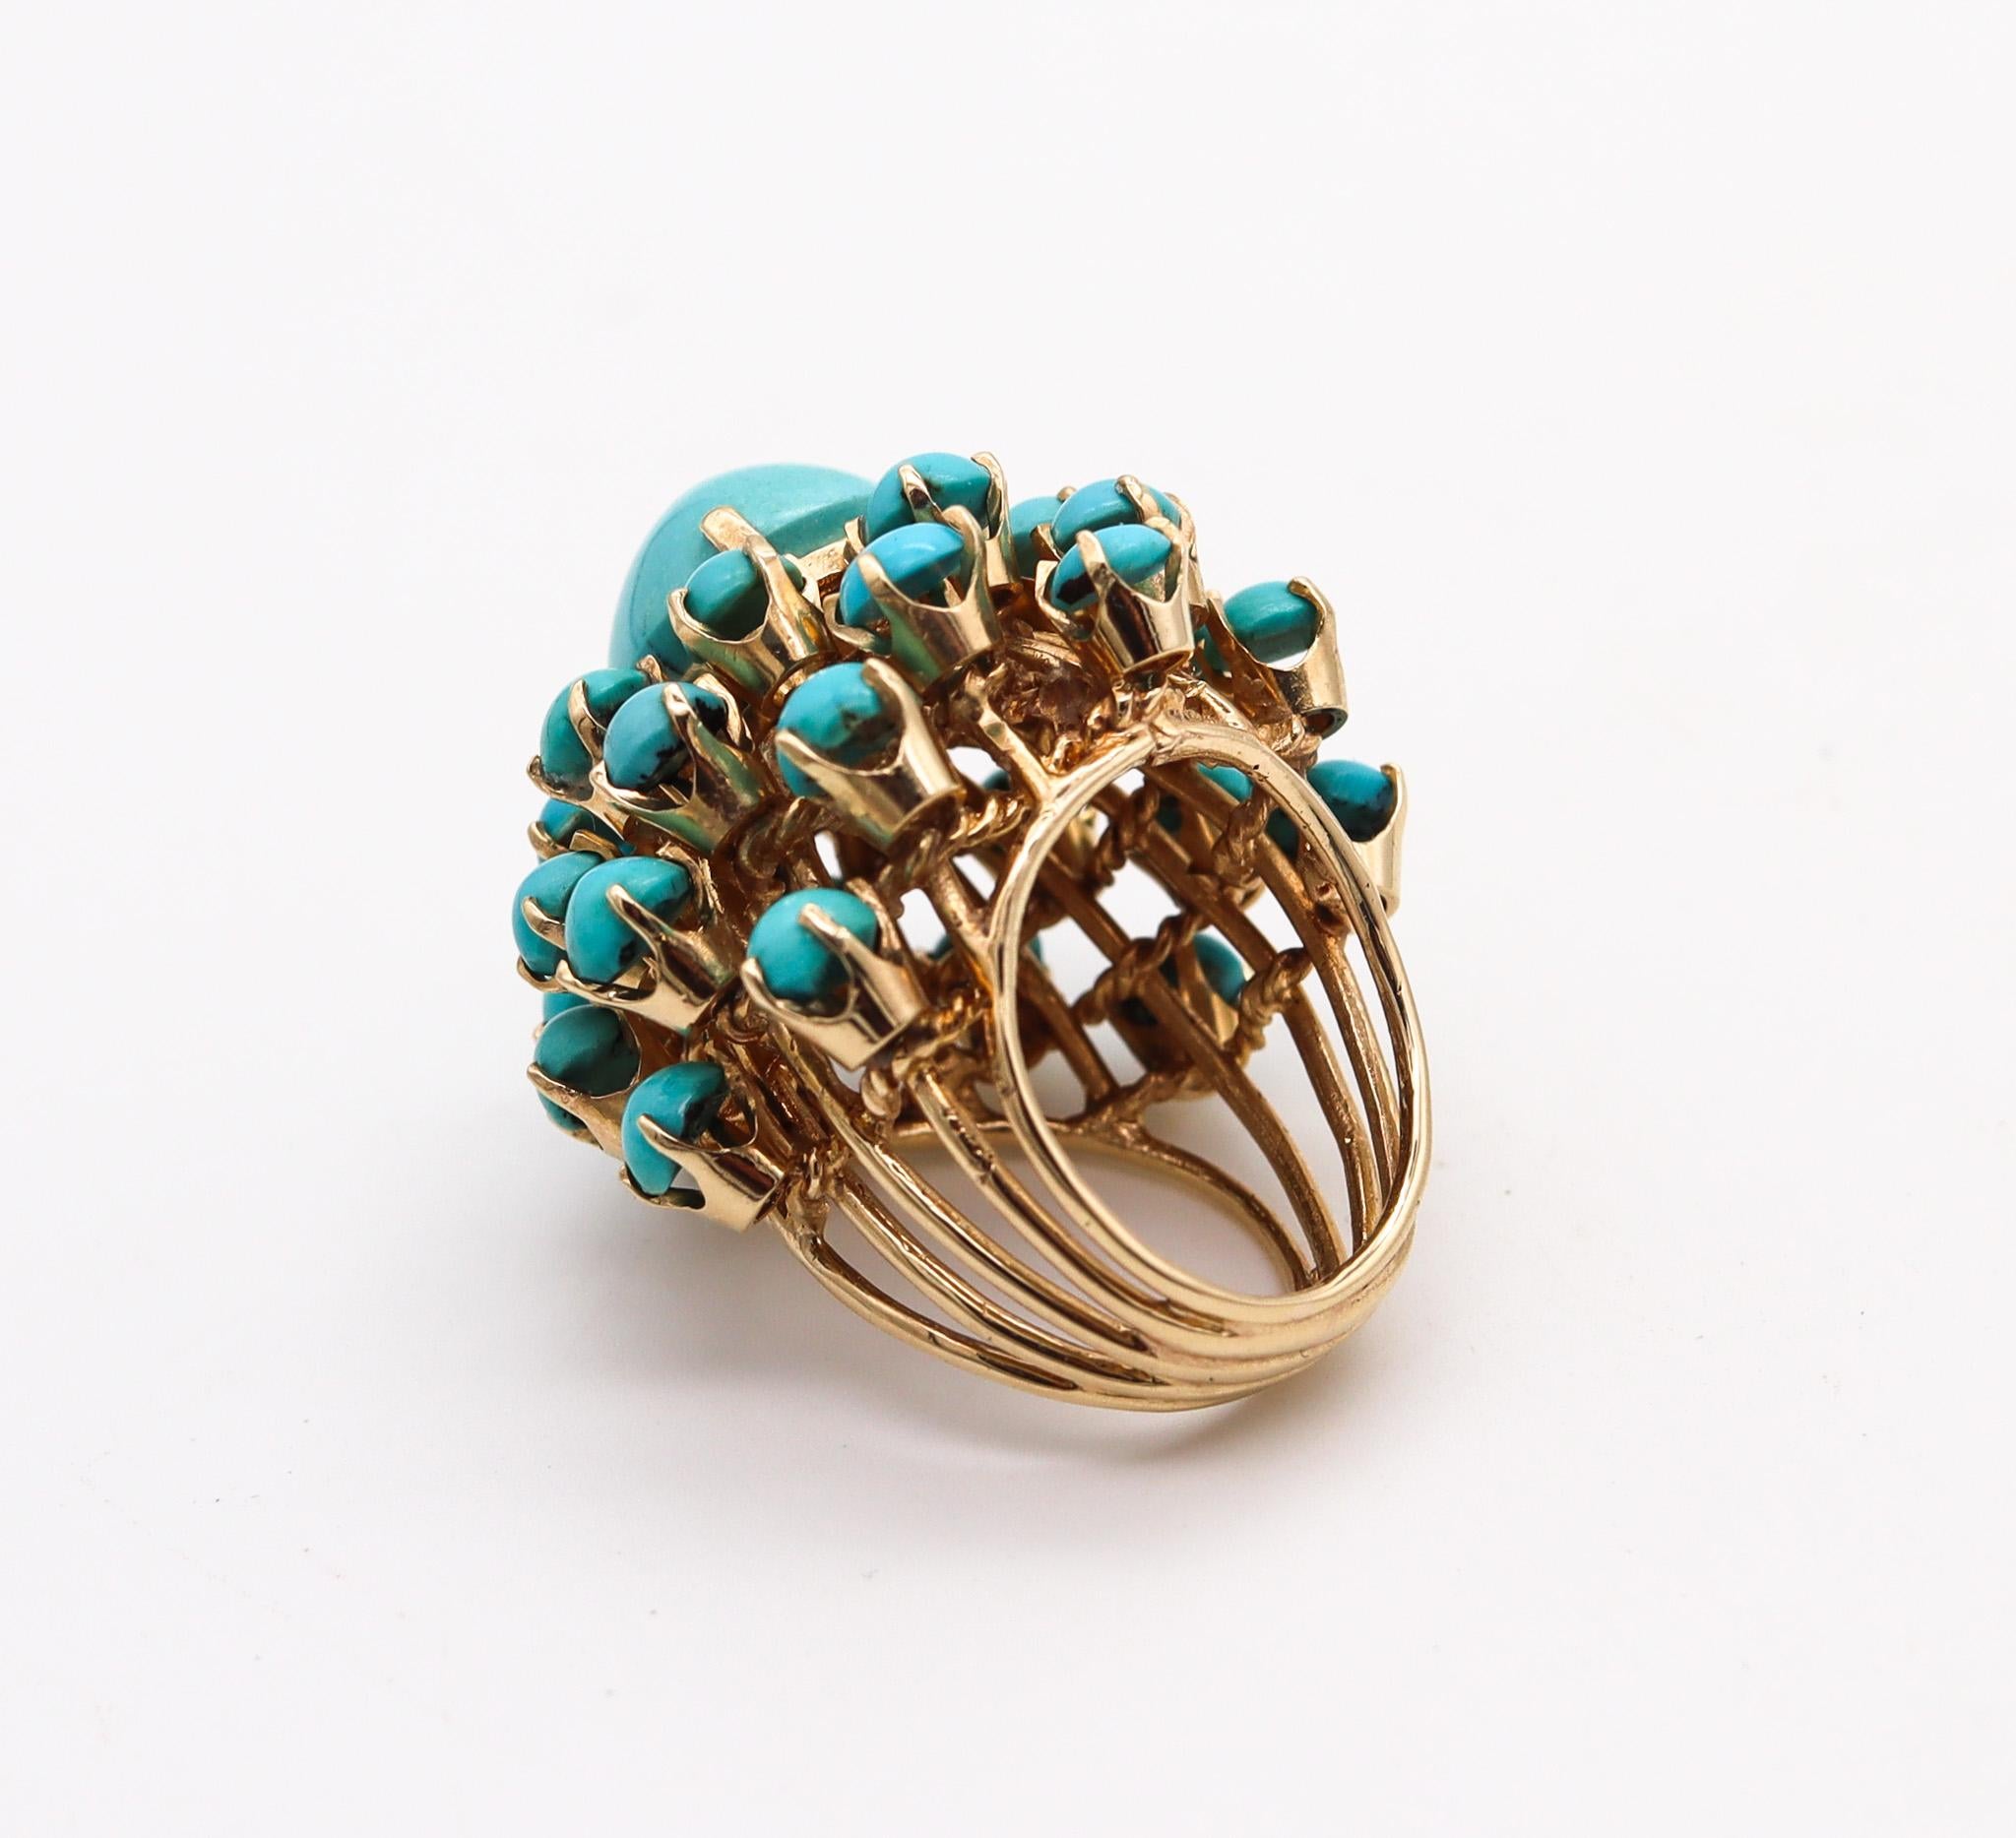 Mid Century 1960 Modernist Cluster Ring In 14Kt Gold With 25.56 Ctw In Turquoise In Excellent Condition For Sale In Miami, FL